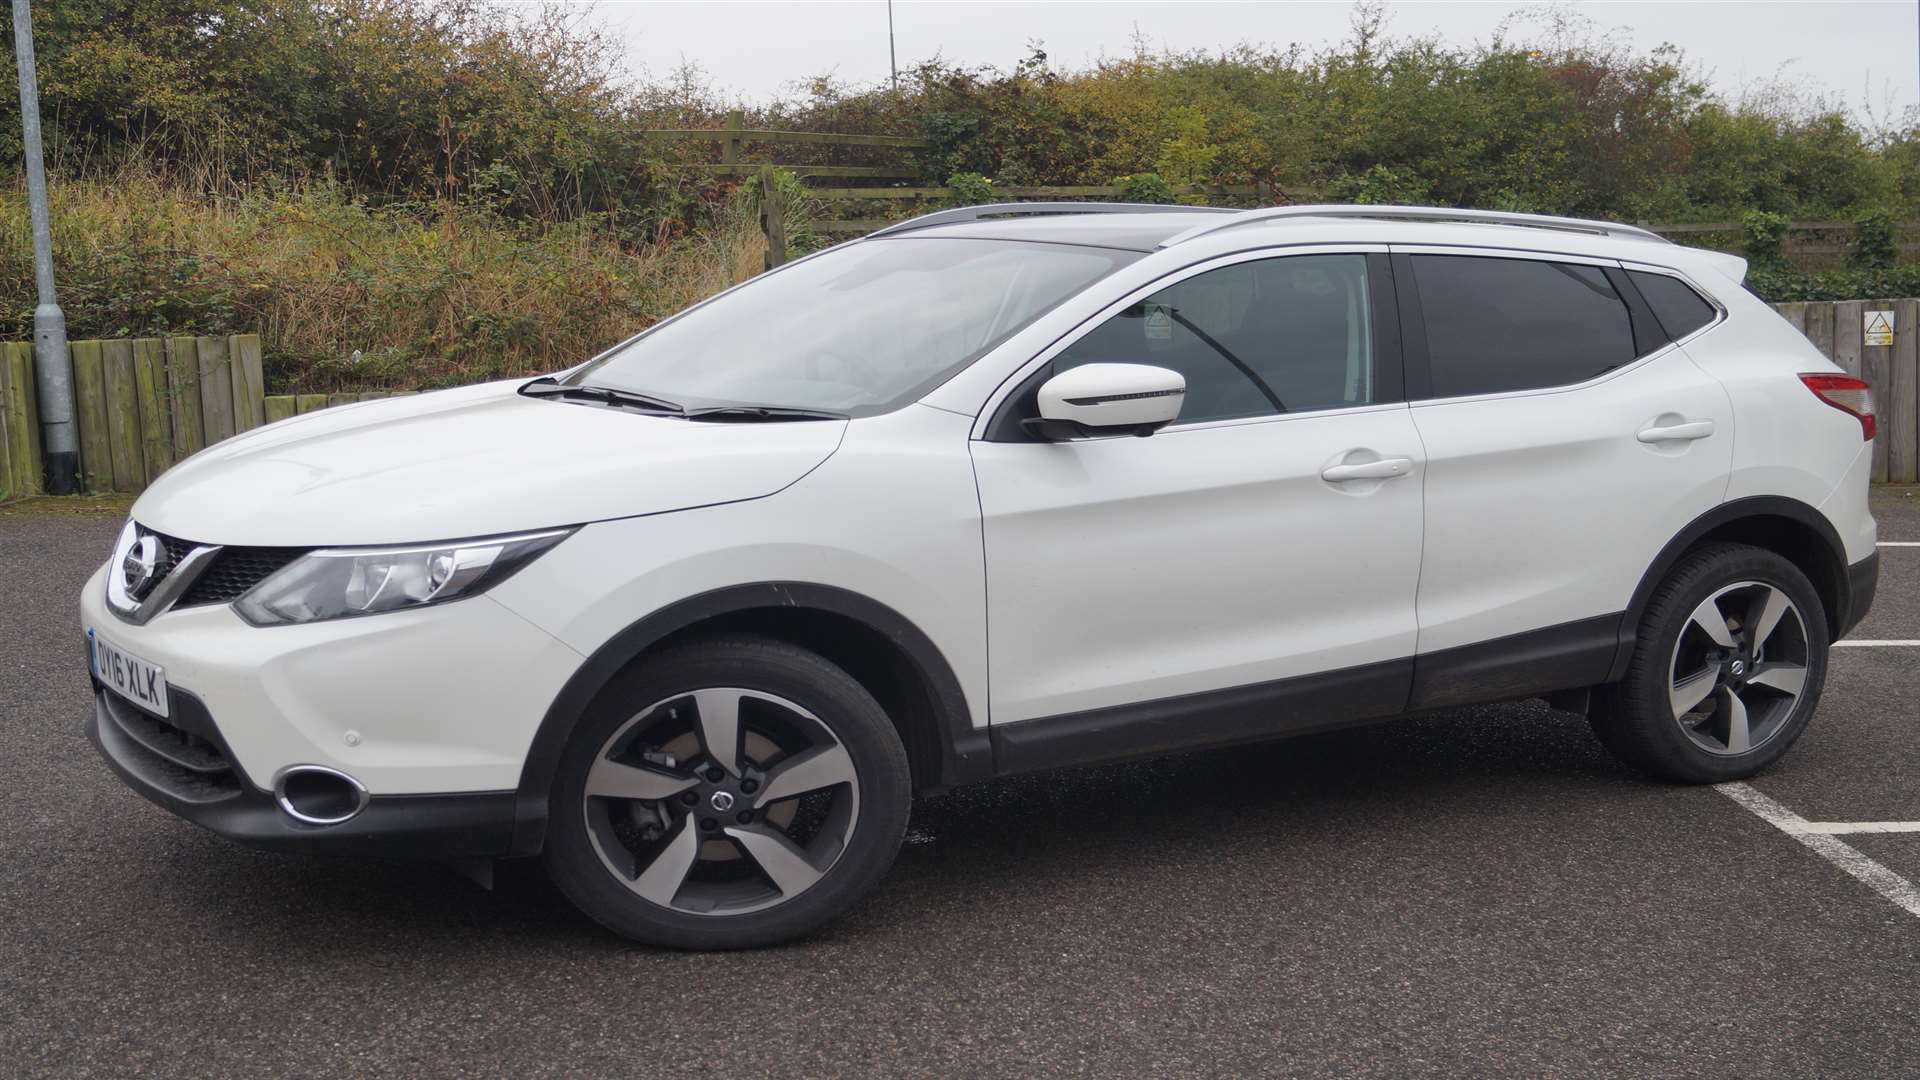 The Qashqai is now in its second incarnation